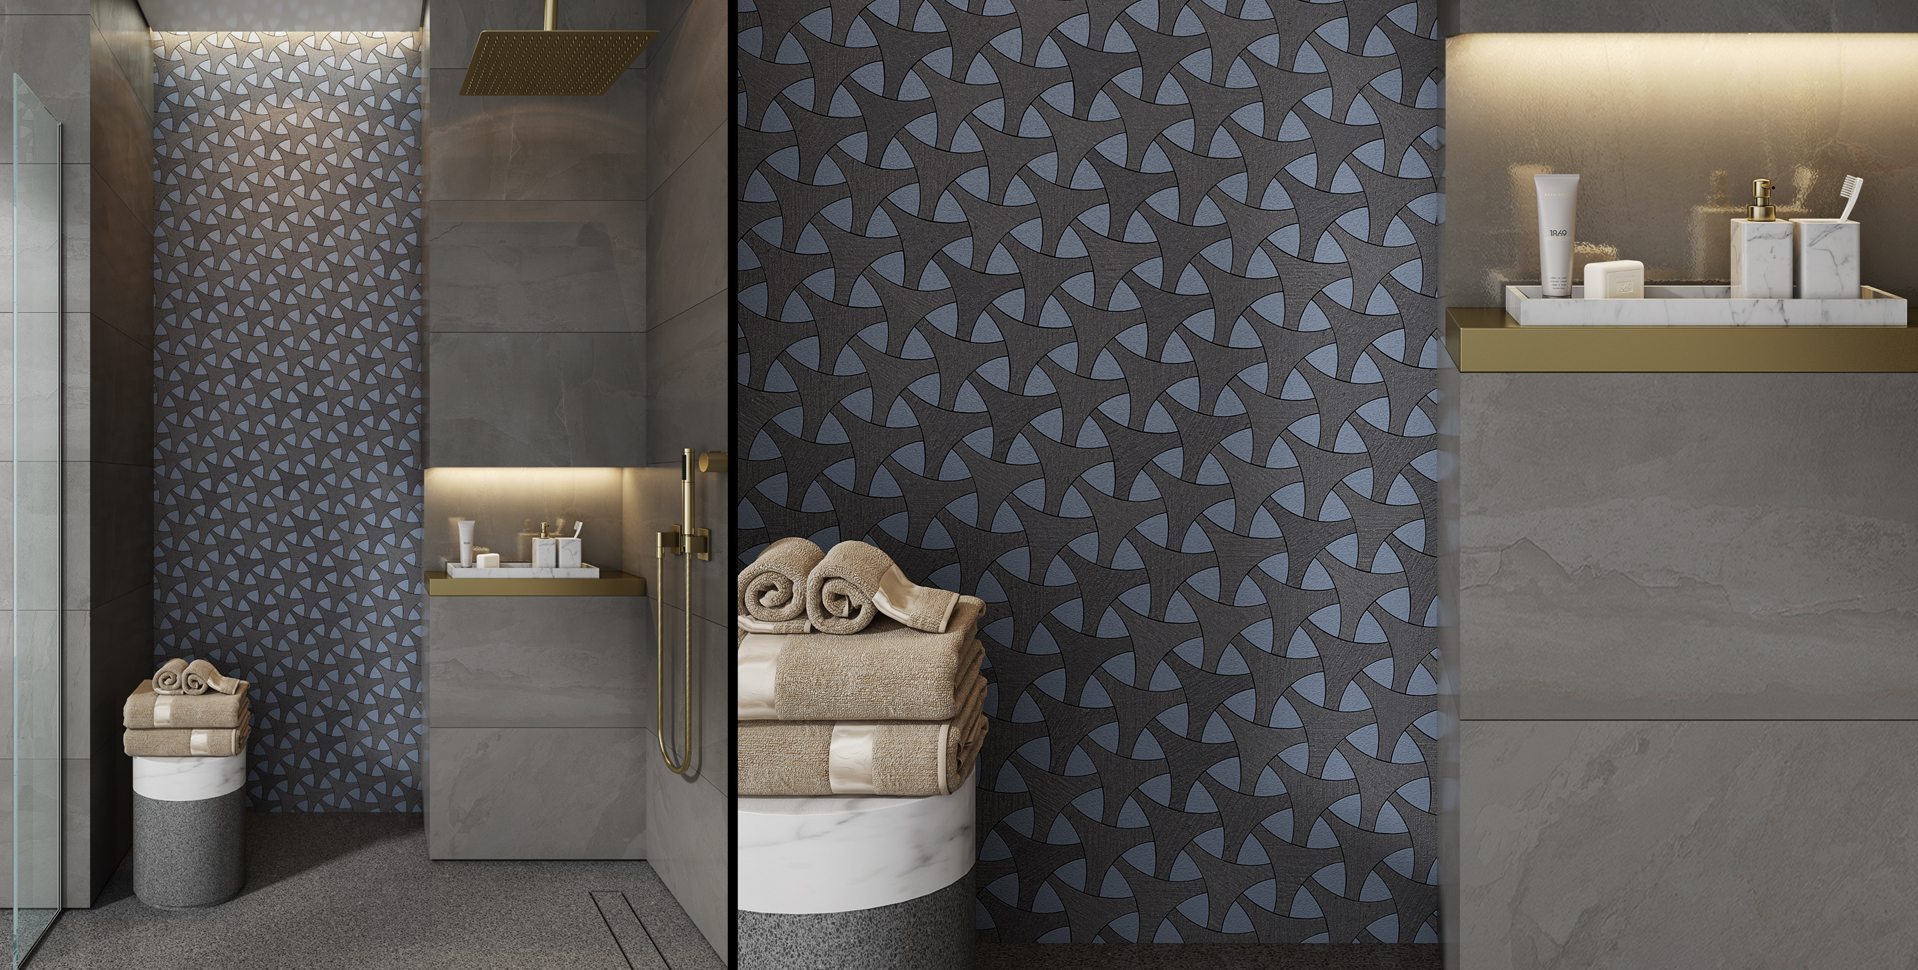 Product Visualization: Wall Covering by Milstone, Bathroom design